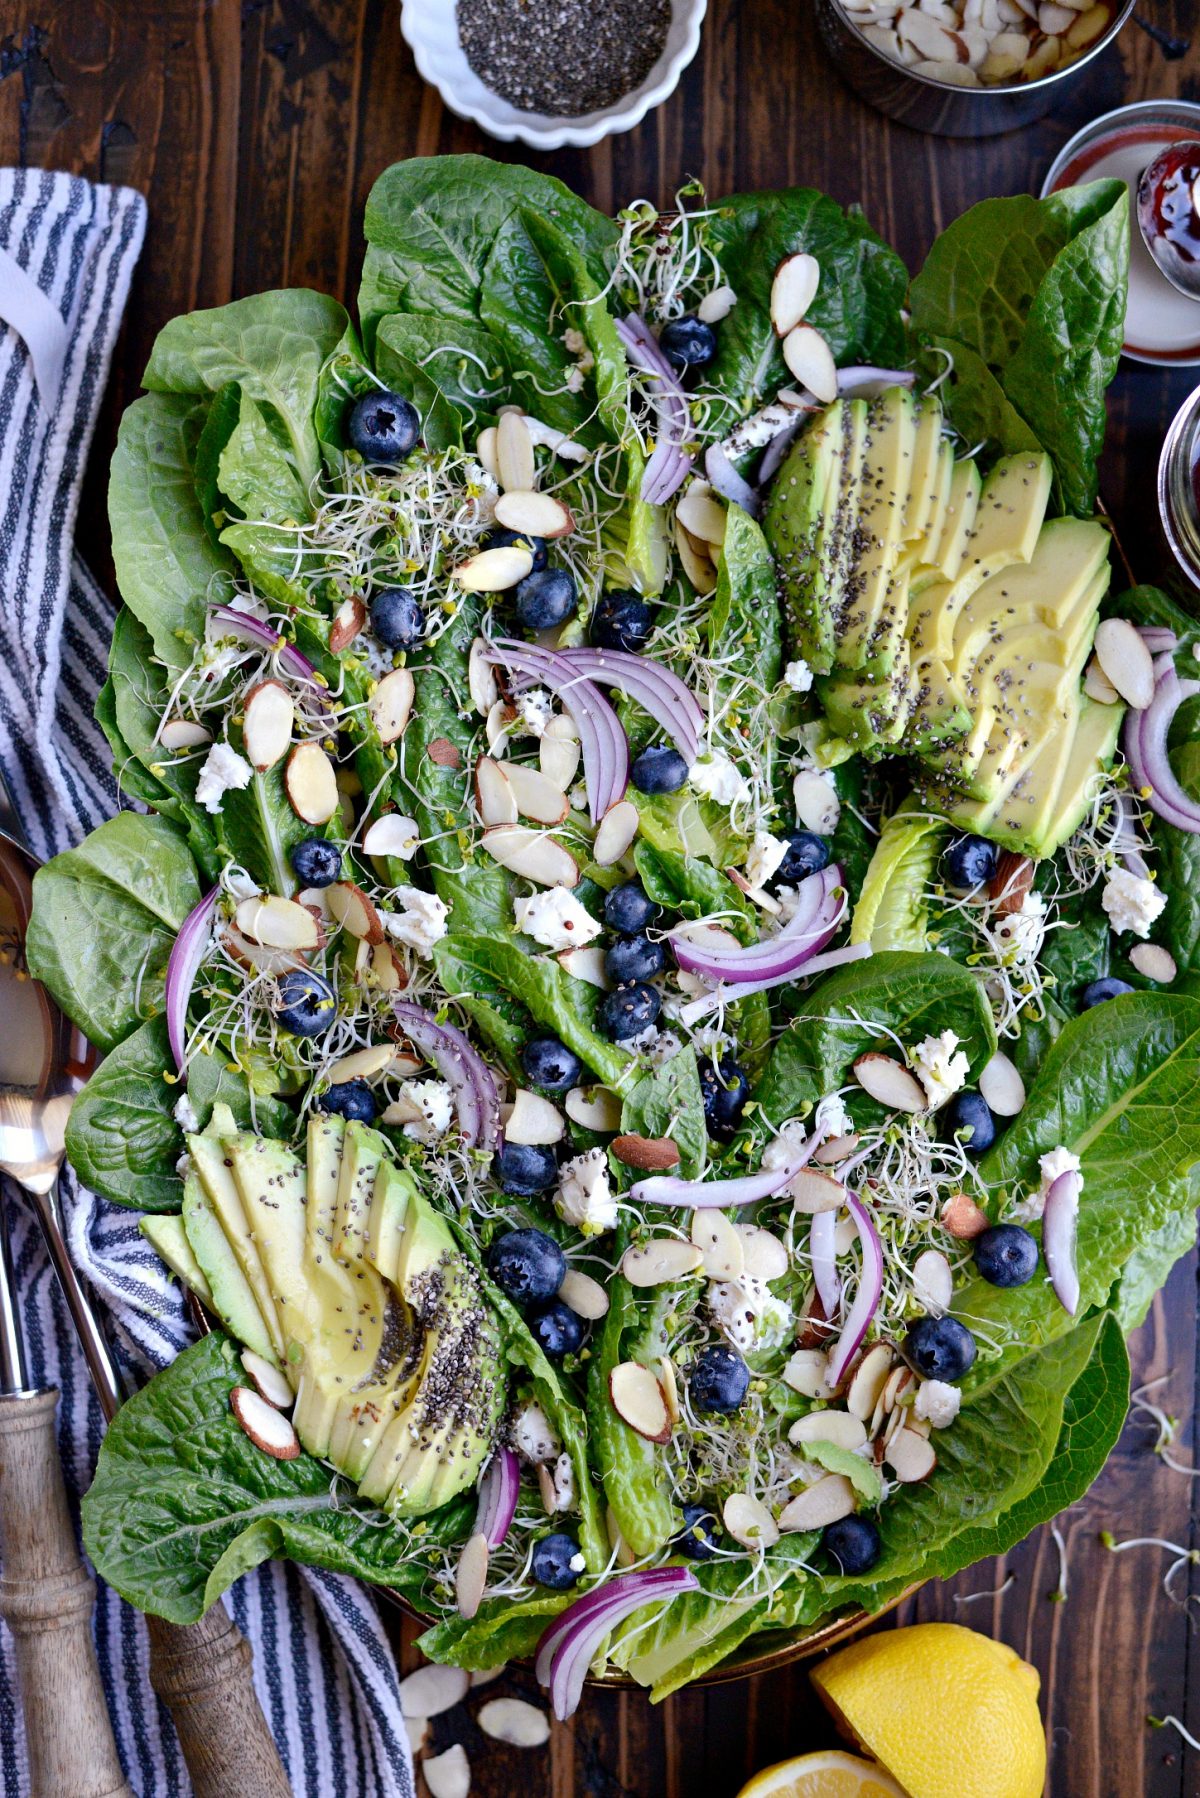 build the Blueberry Almond Salad